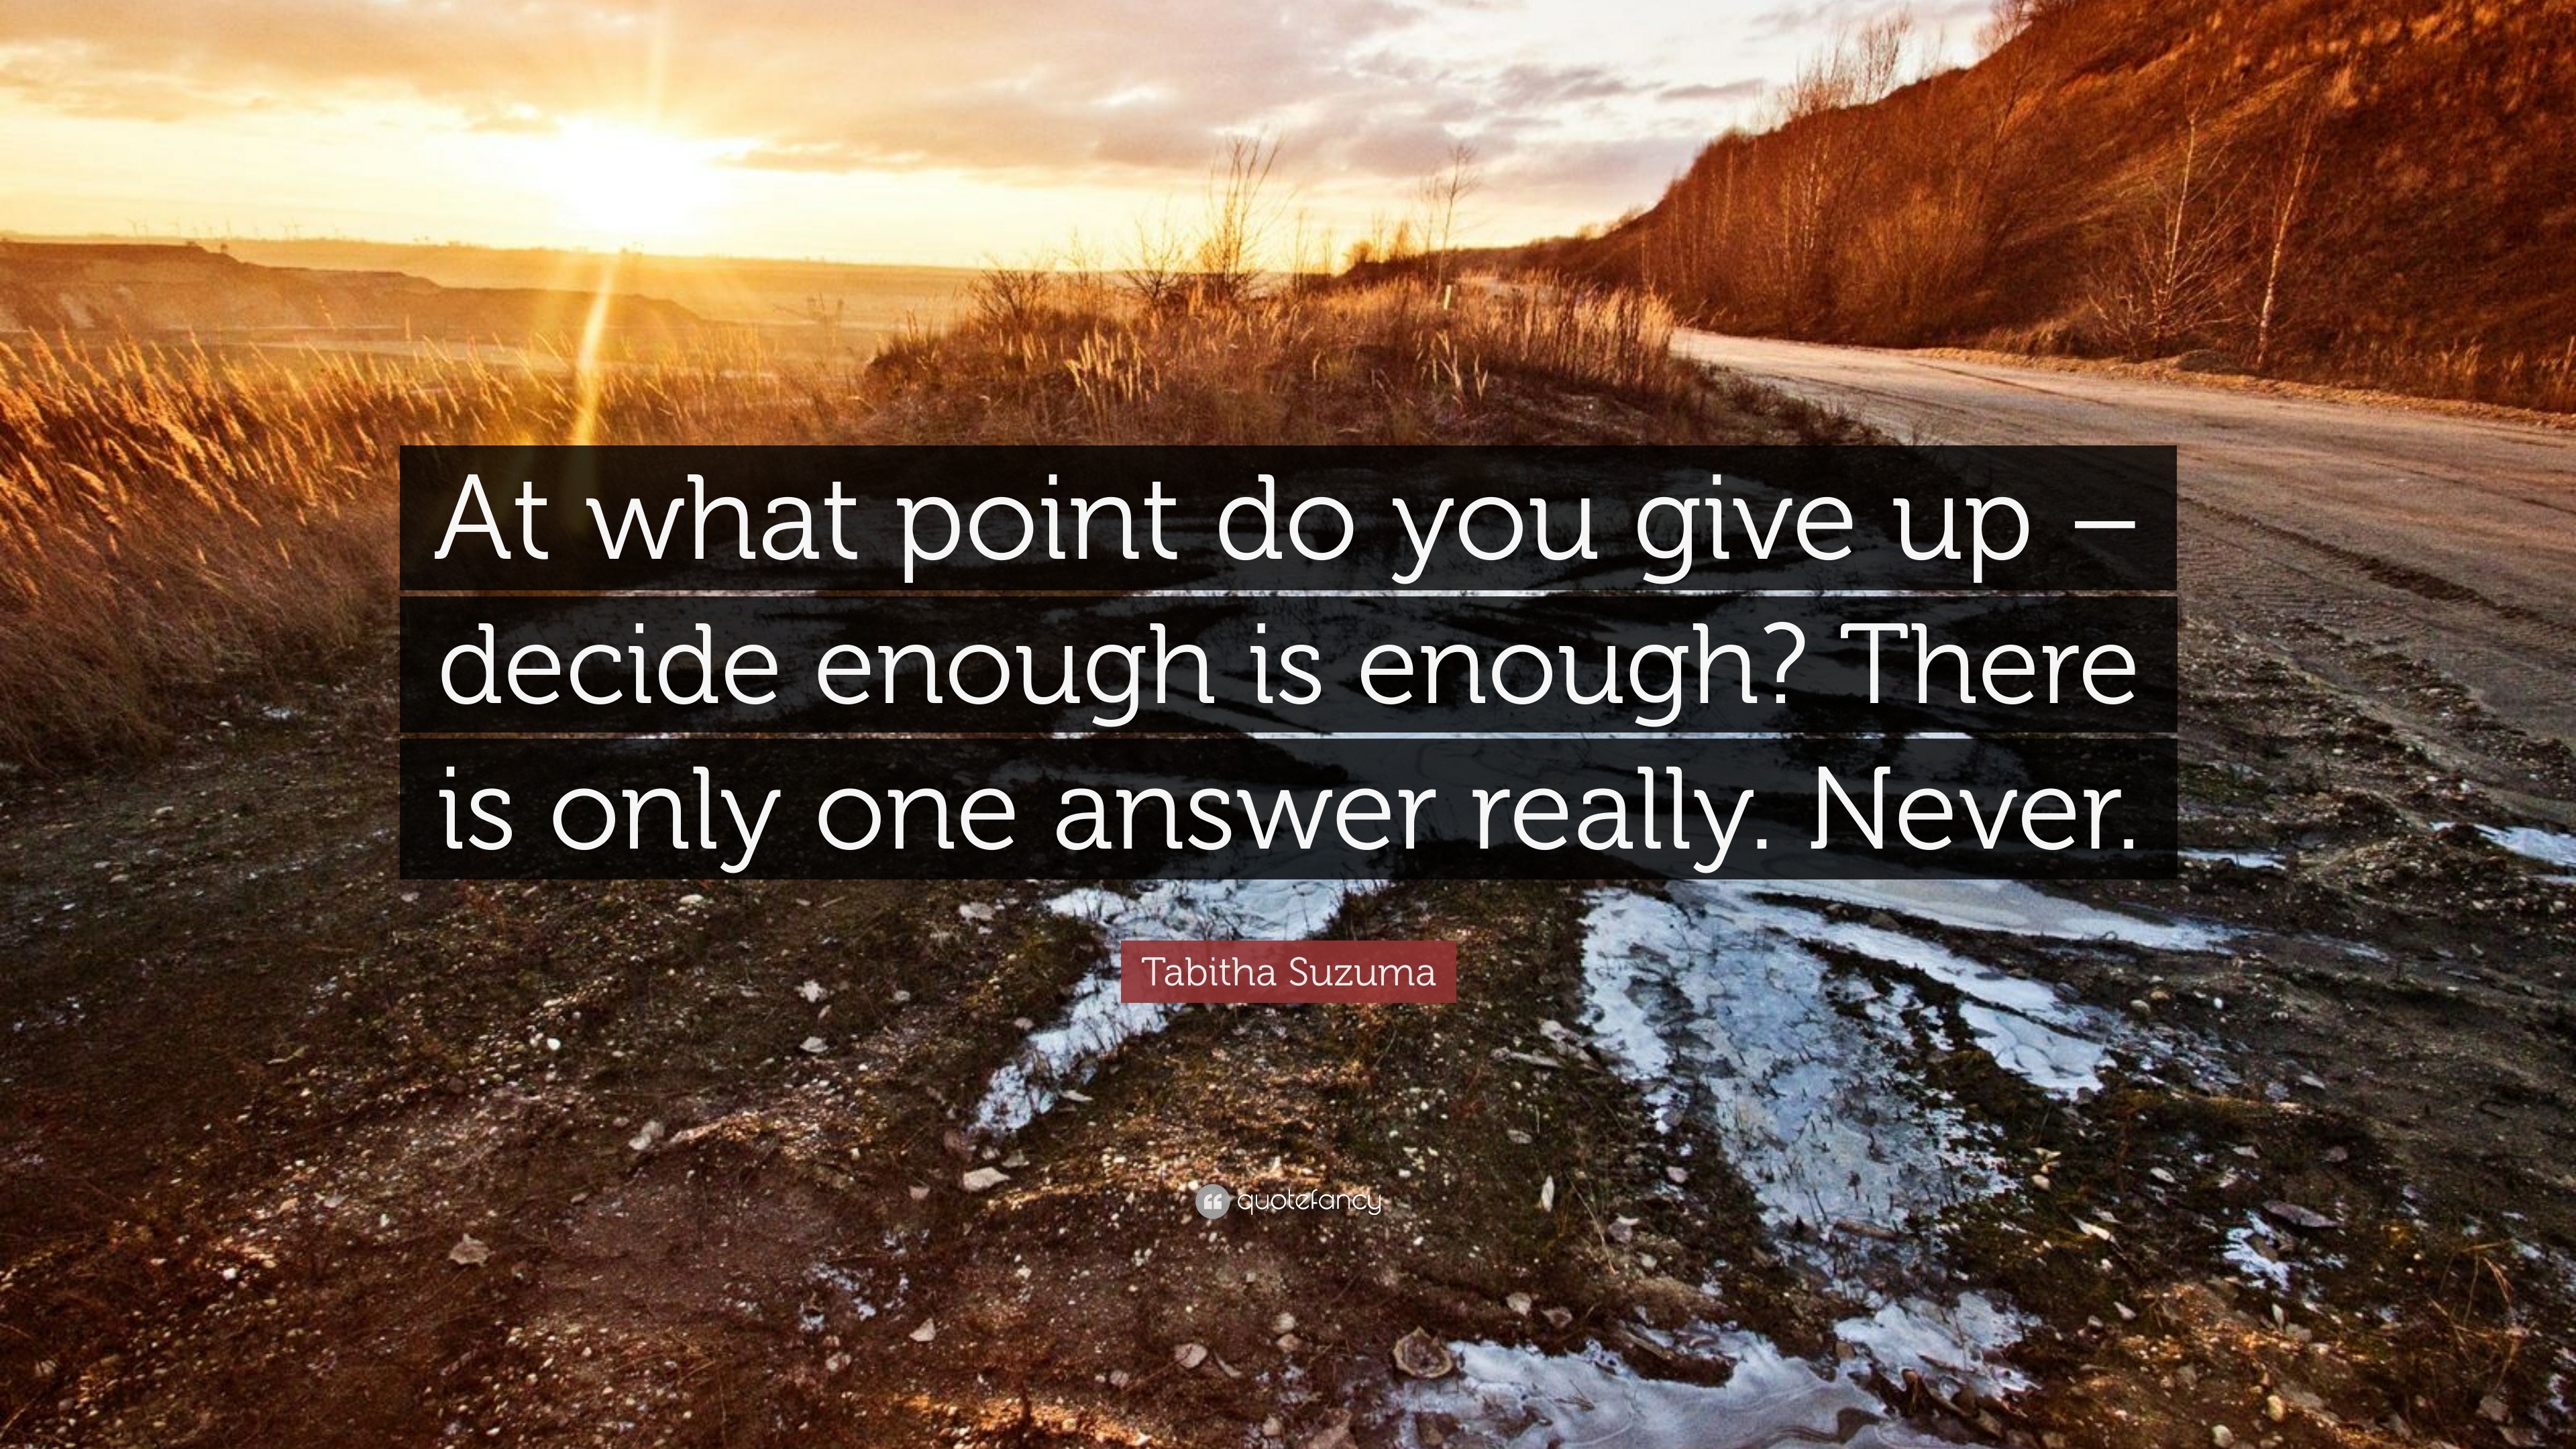 Tabitha Suzuma Quote “At what point do you give up – decide enough is